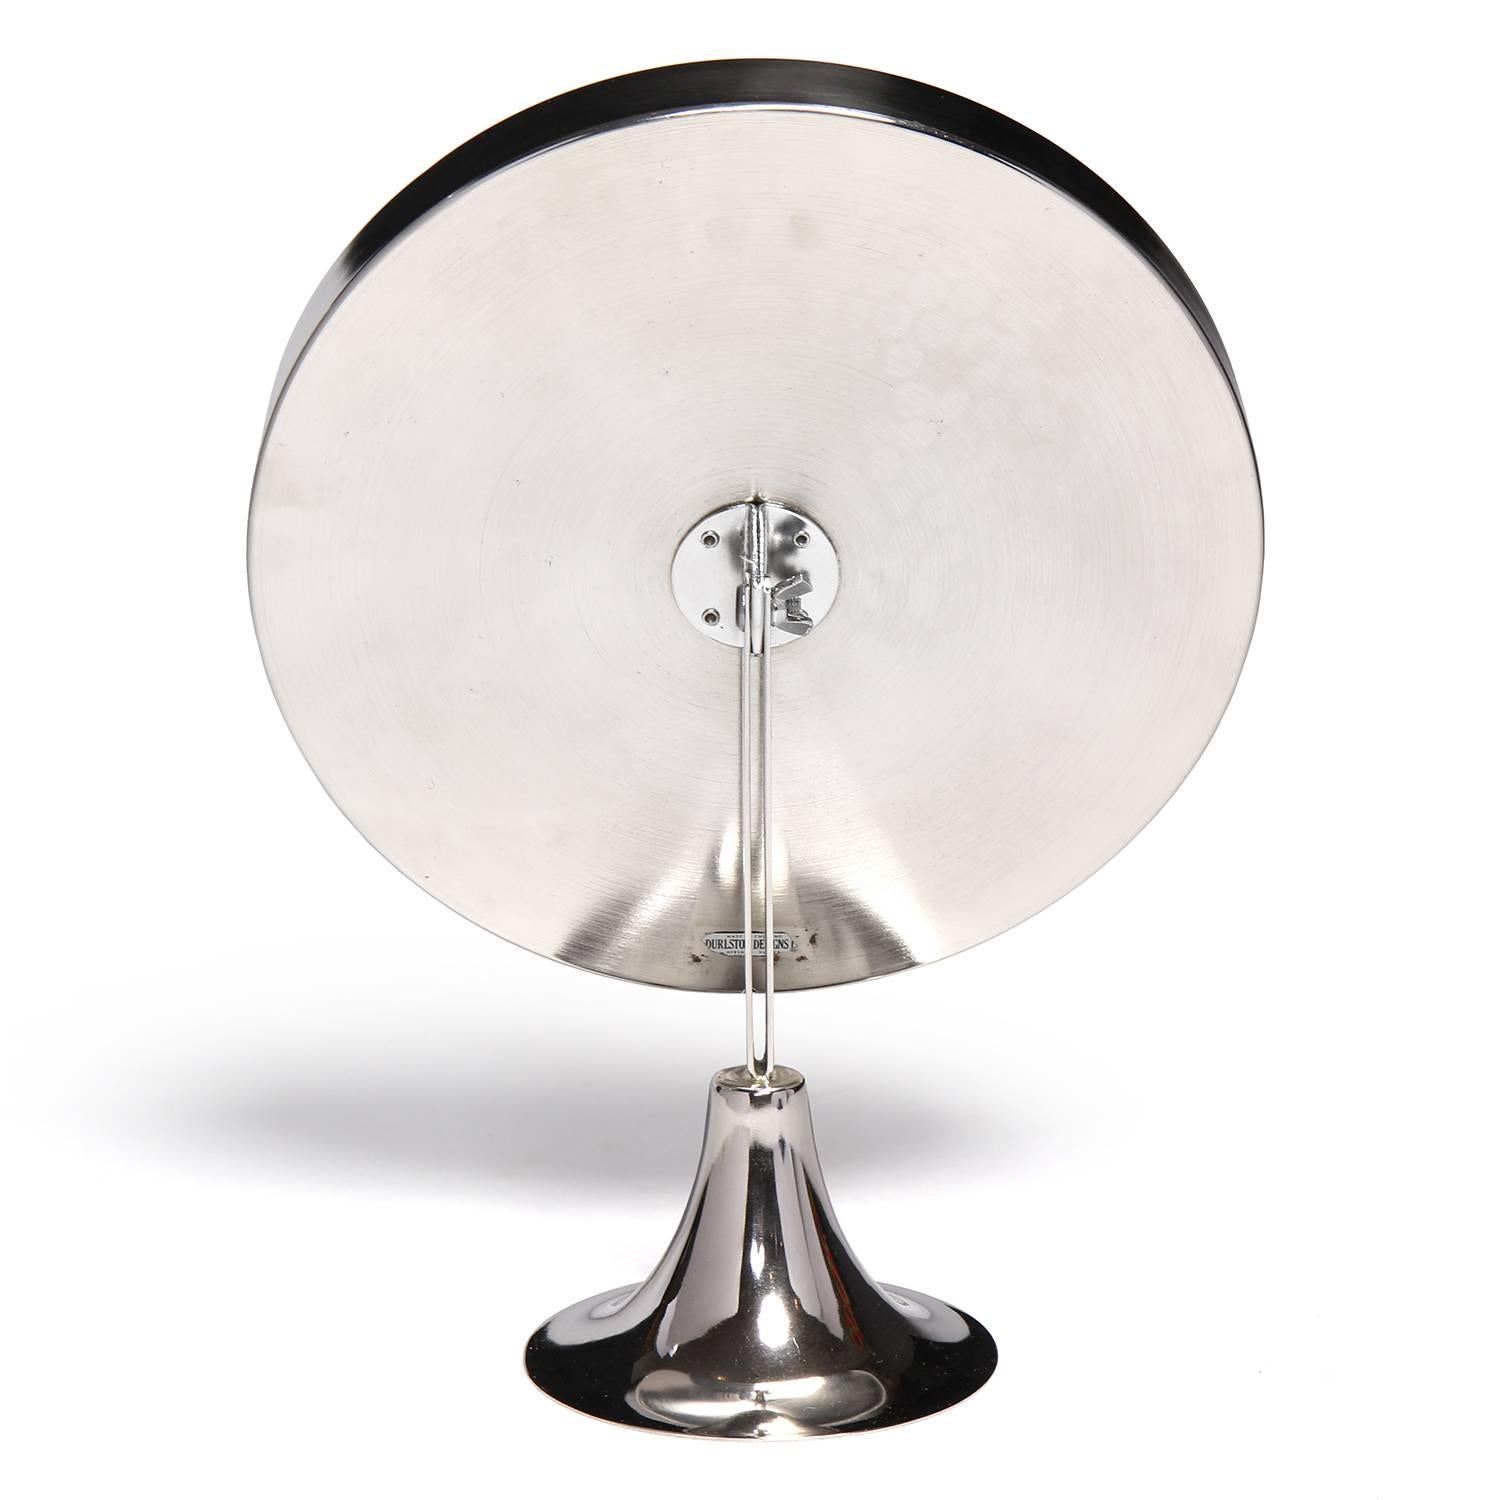 Mid-20th Century Table Mirror by Robert Welch